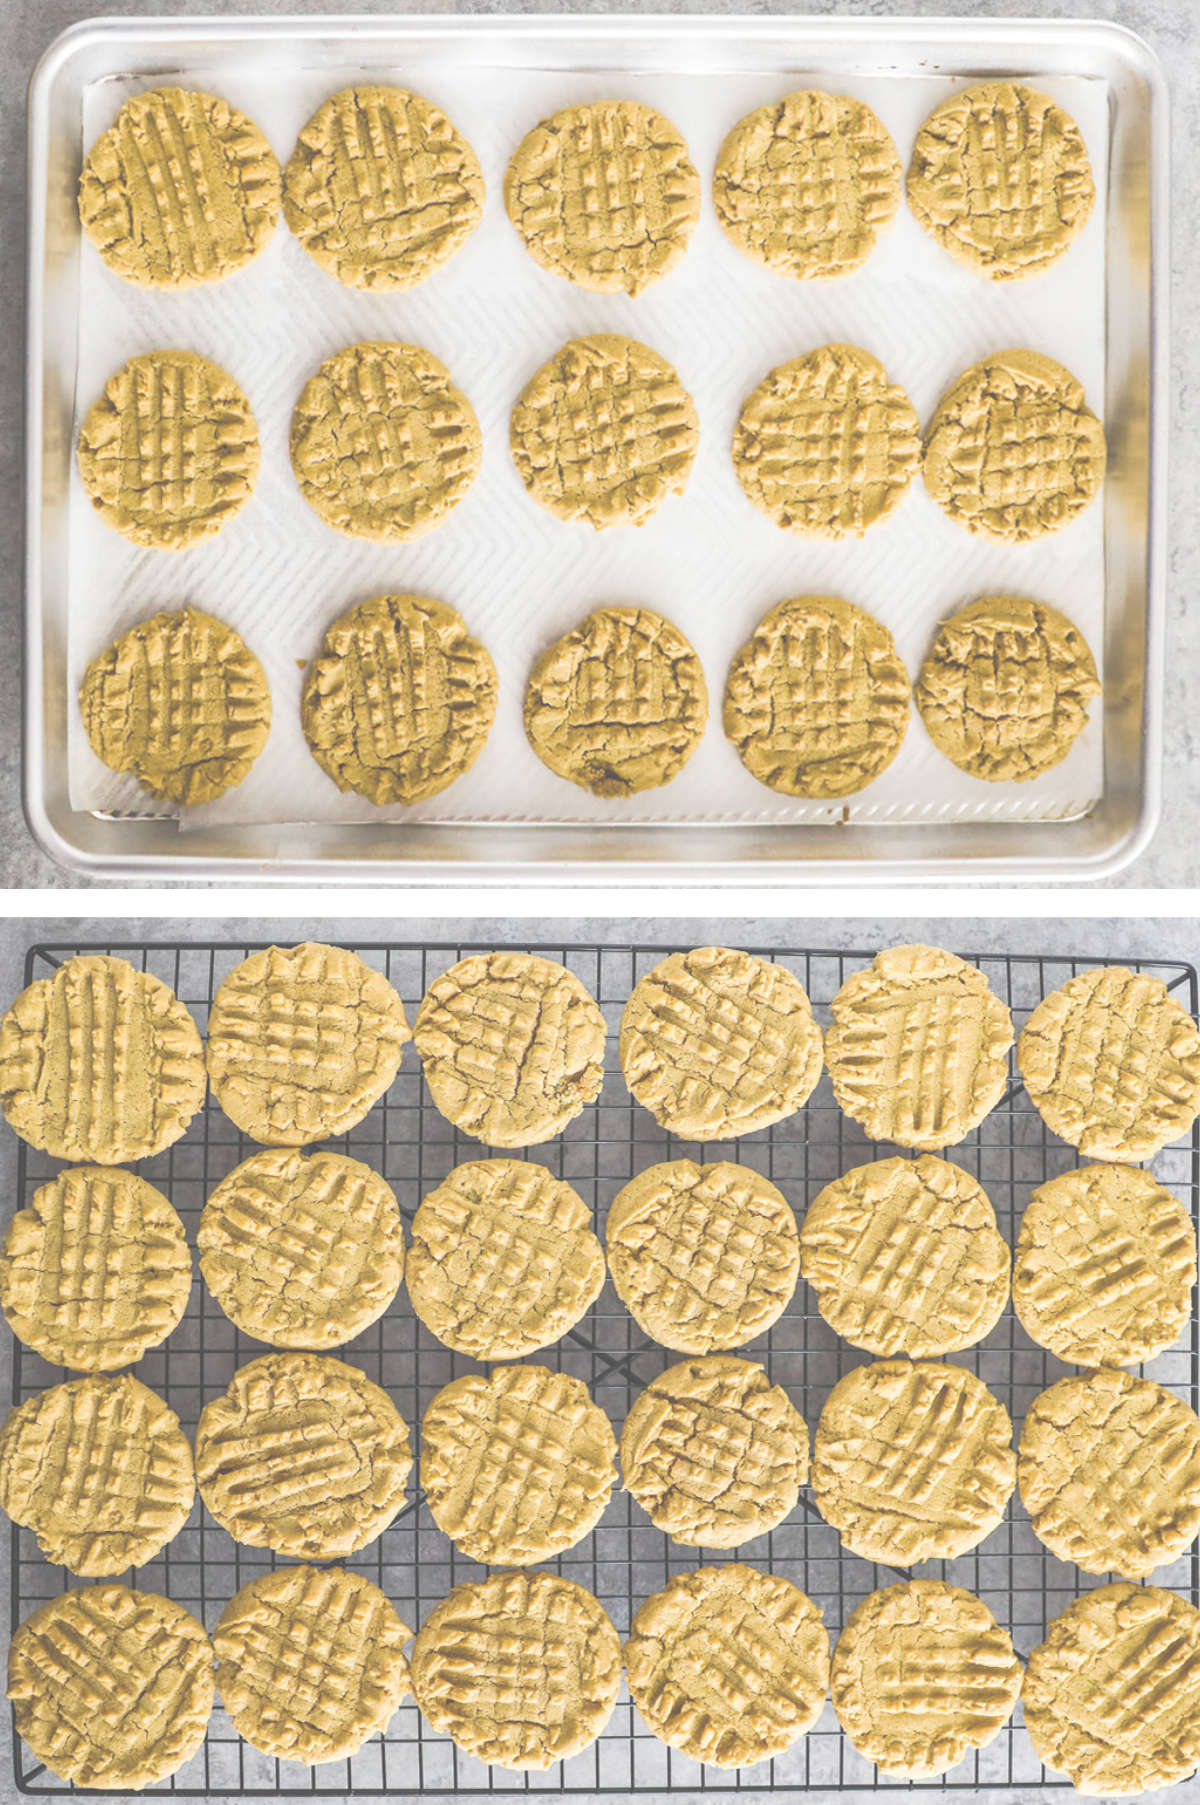 Two overhead images in one: 1. Baked cookies are removed from oven. 2. Cookies are placed on a rack to cool. 